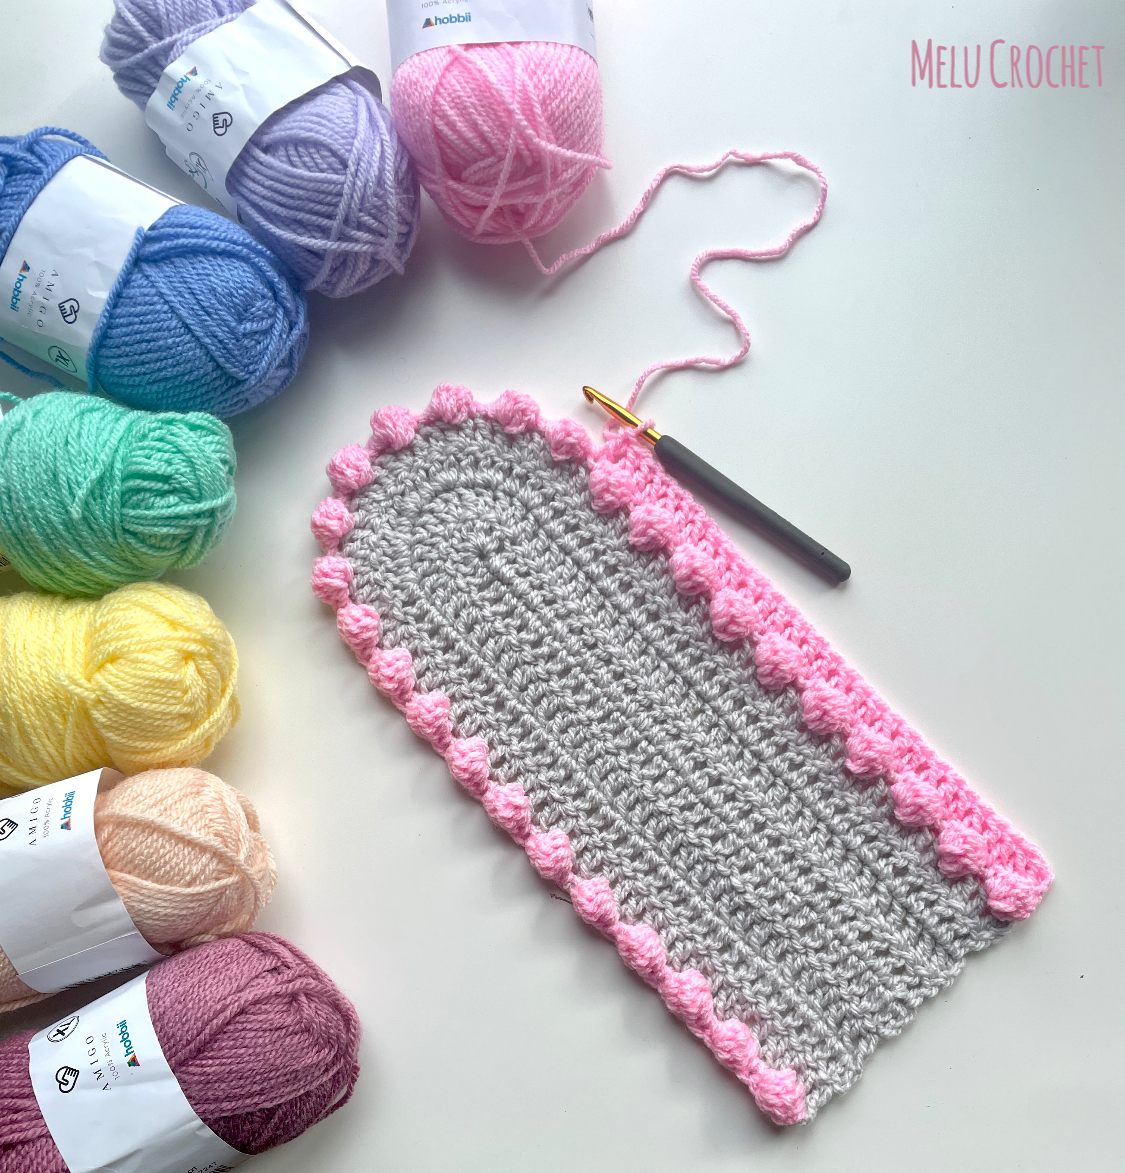 Pattern Testing: I’m looking for new beginner crocheters to test my patterns!